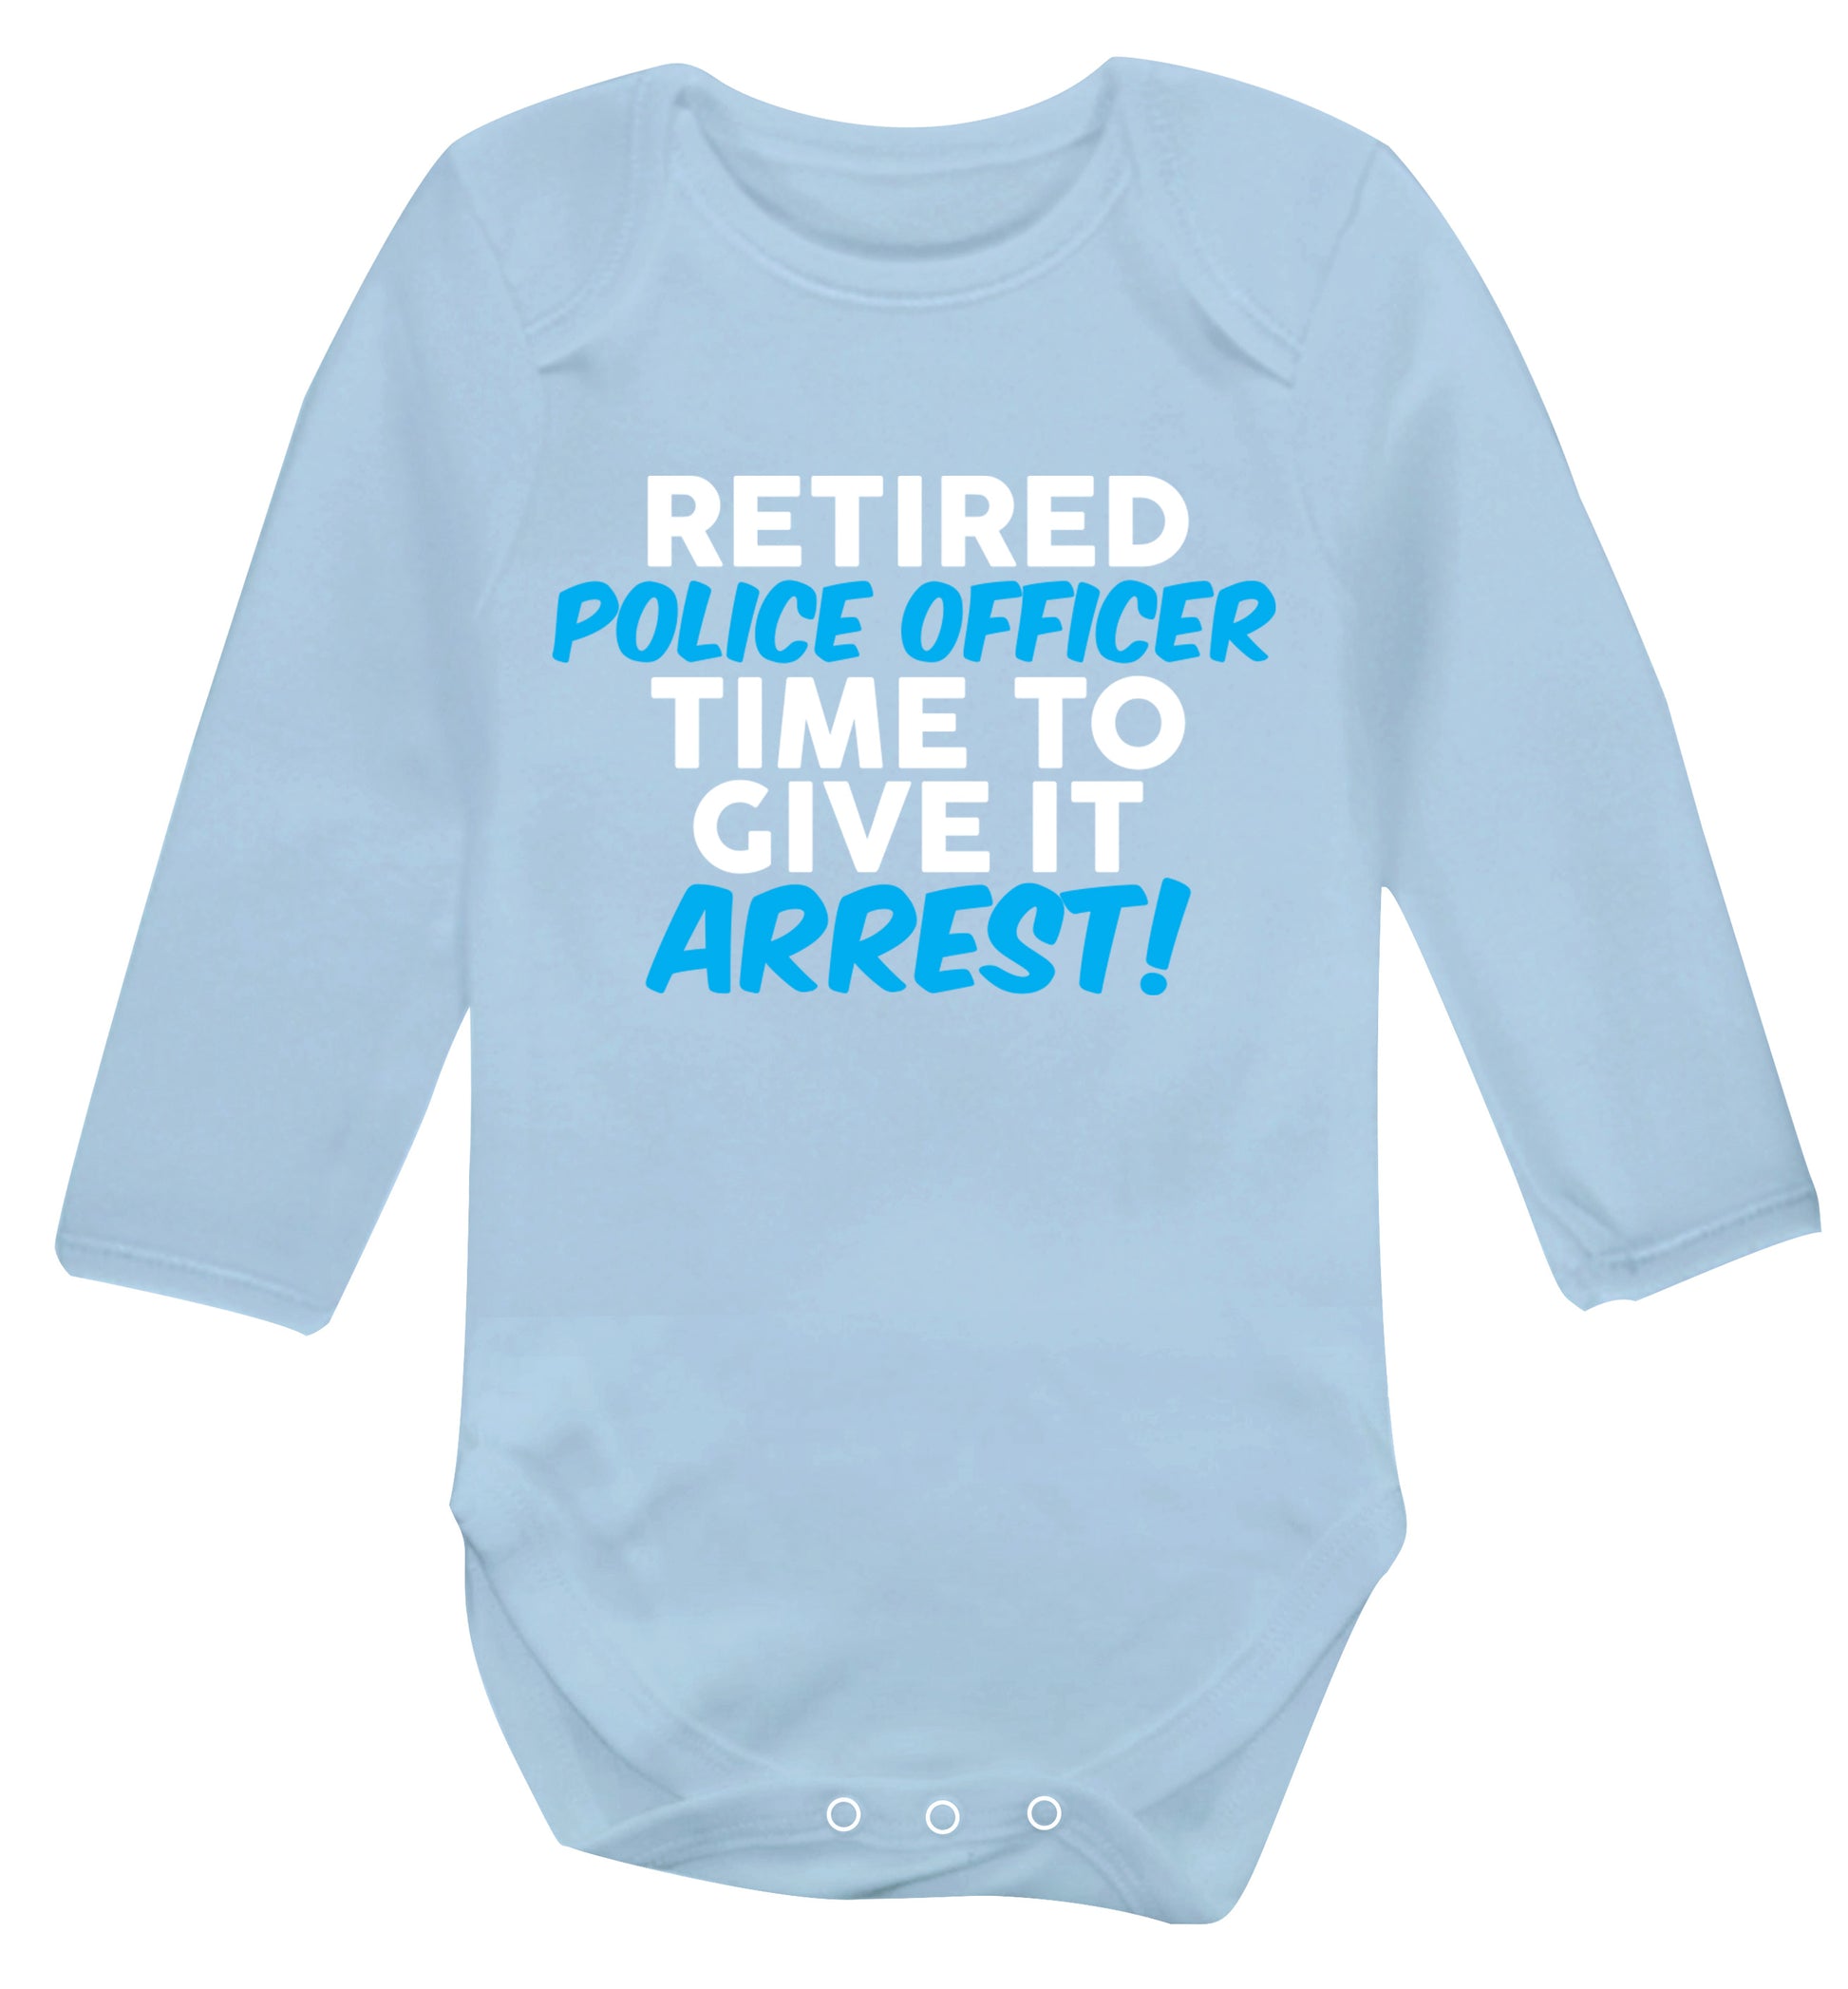 Retired police officer time to give it arrest Baby Vest long sleeved pale blue 6-12 months